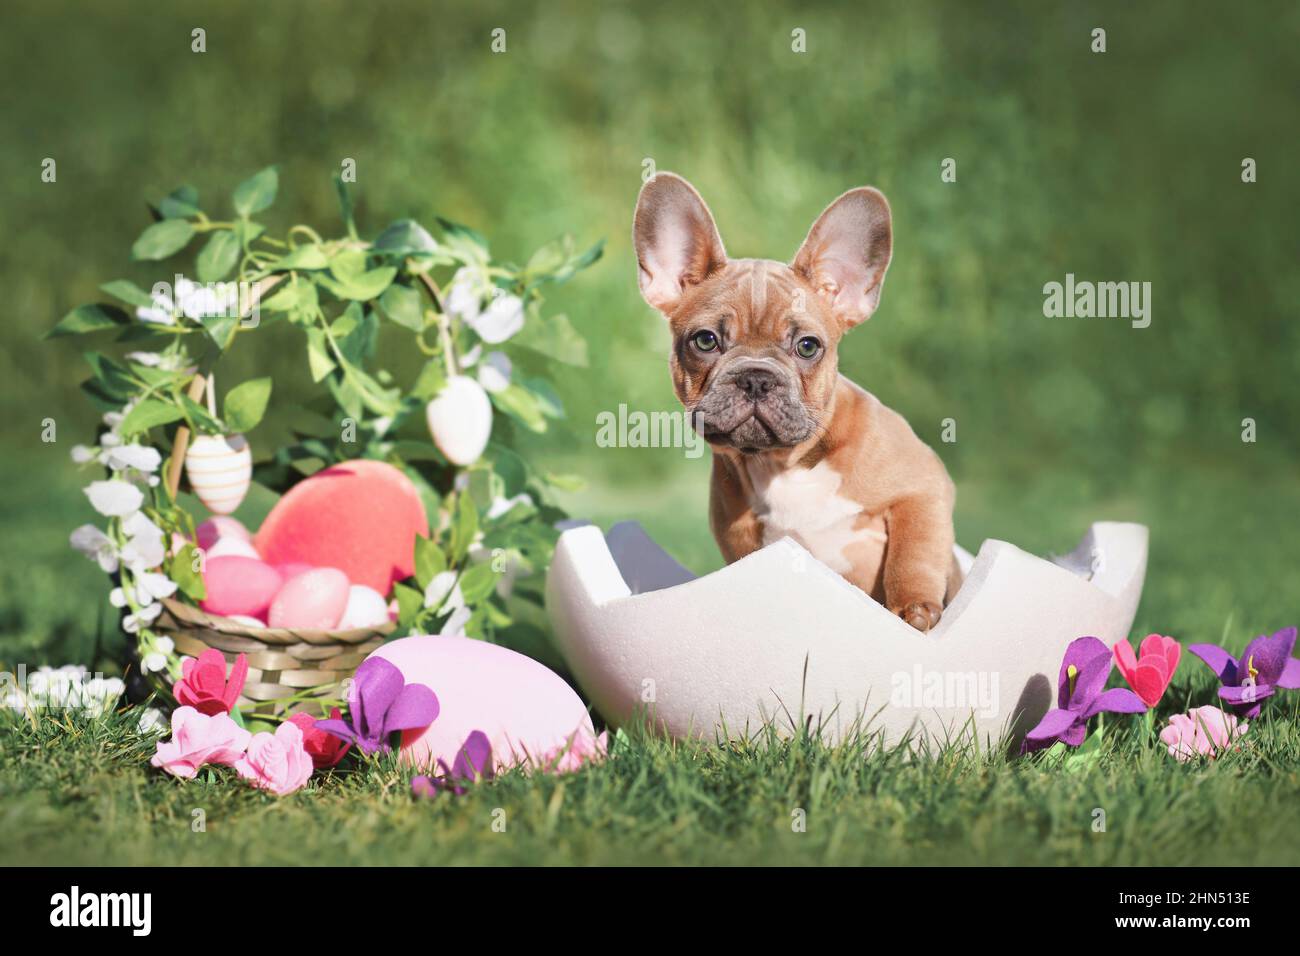 Easter dog. French Bulldog puppy sitting in egg shell next to Easter basket and colorful eggs with spring flowers Stock Photo